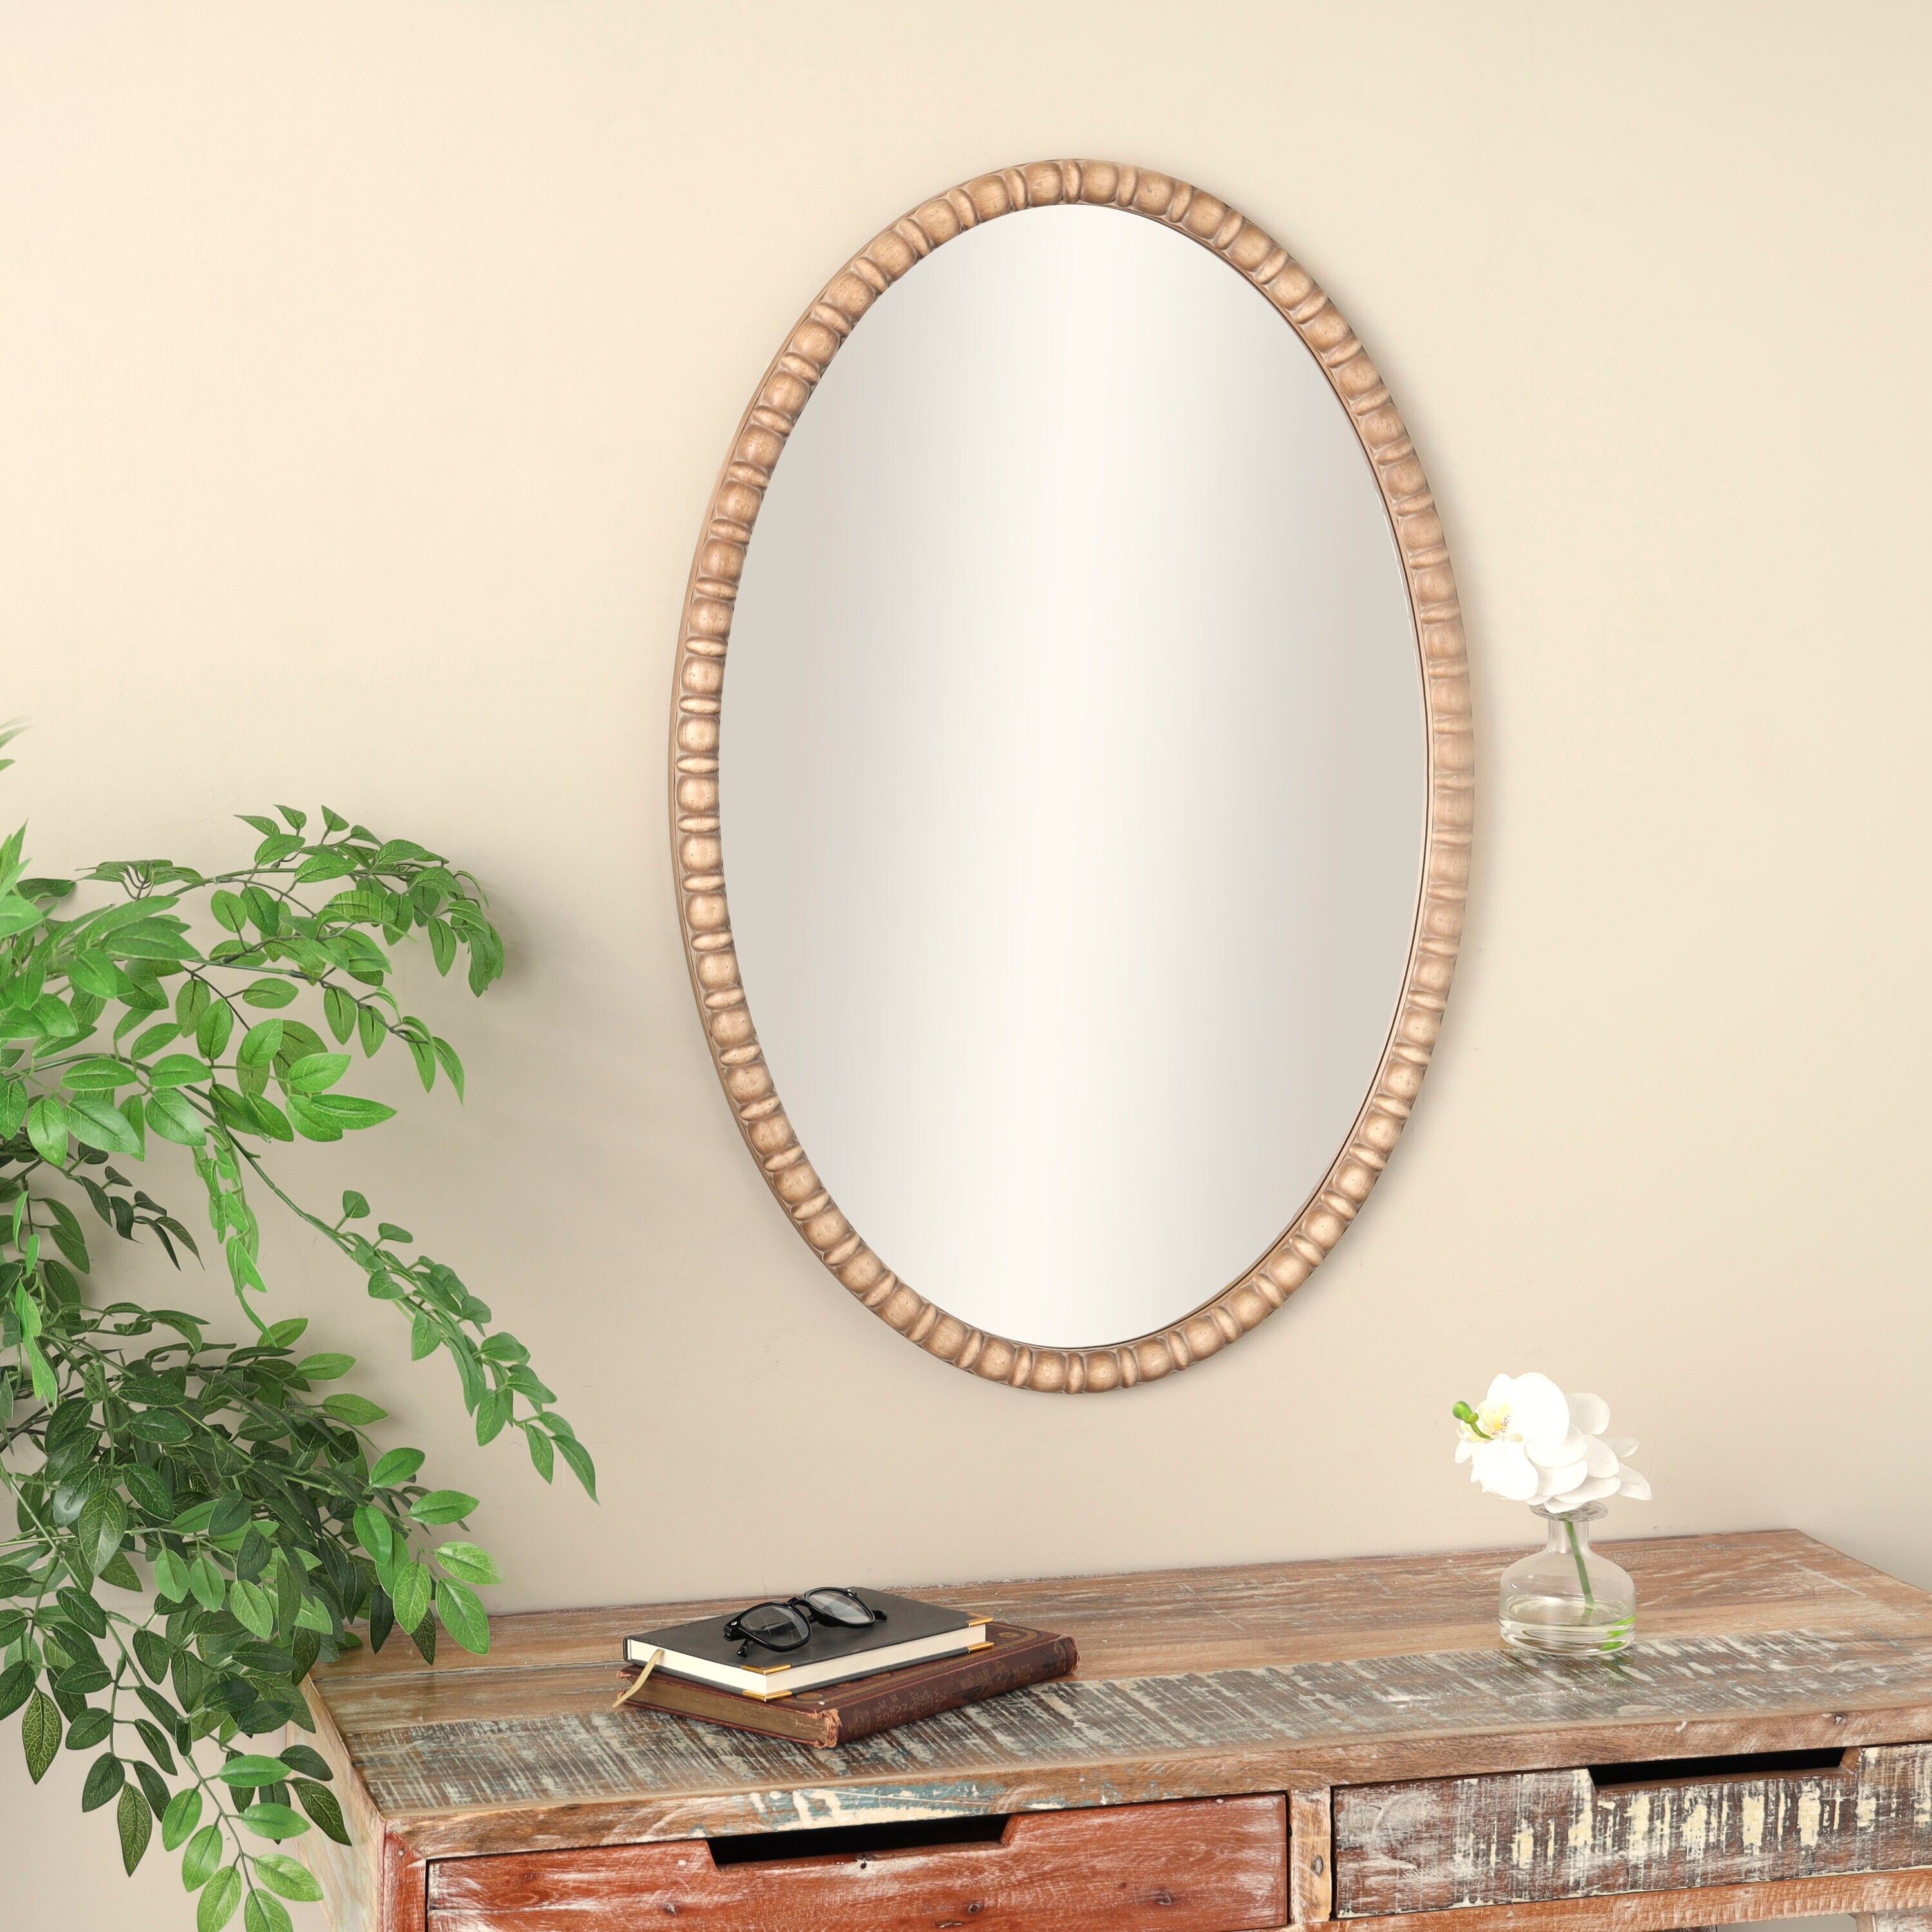 Grayson Lane 25.25-in W x 36.75-in H Oval Brown Beaded Framed Wall